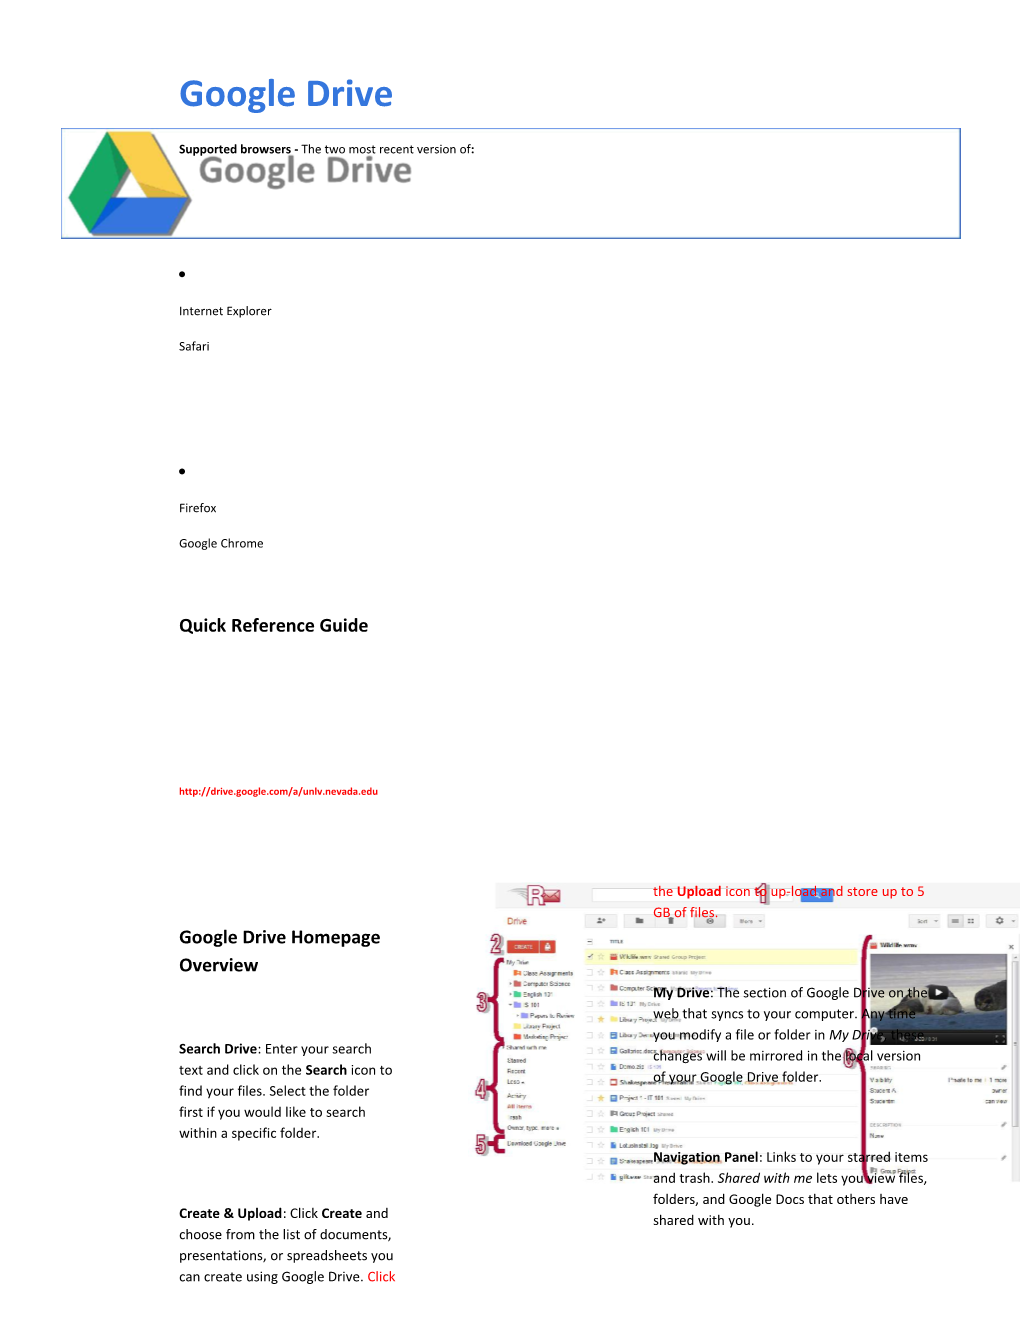 Google Drive Homepage Overview